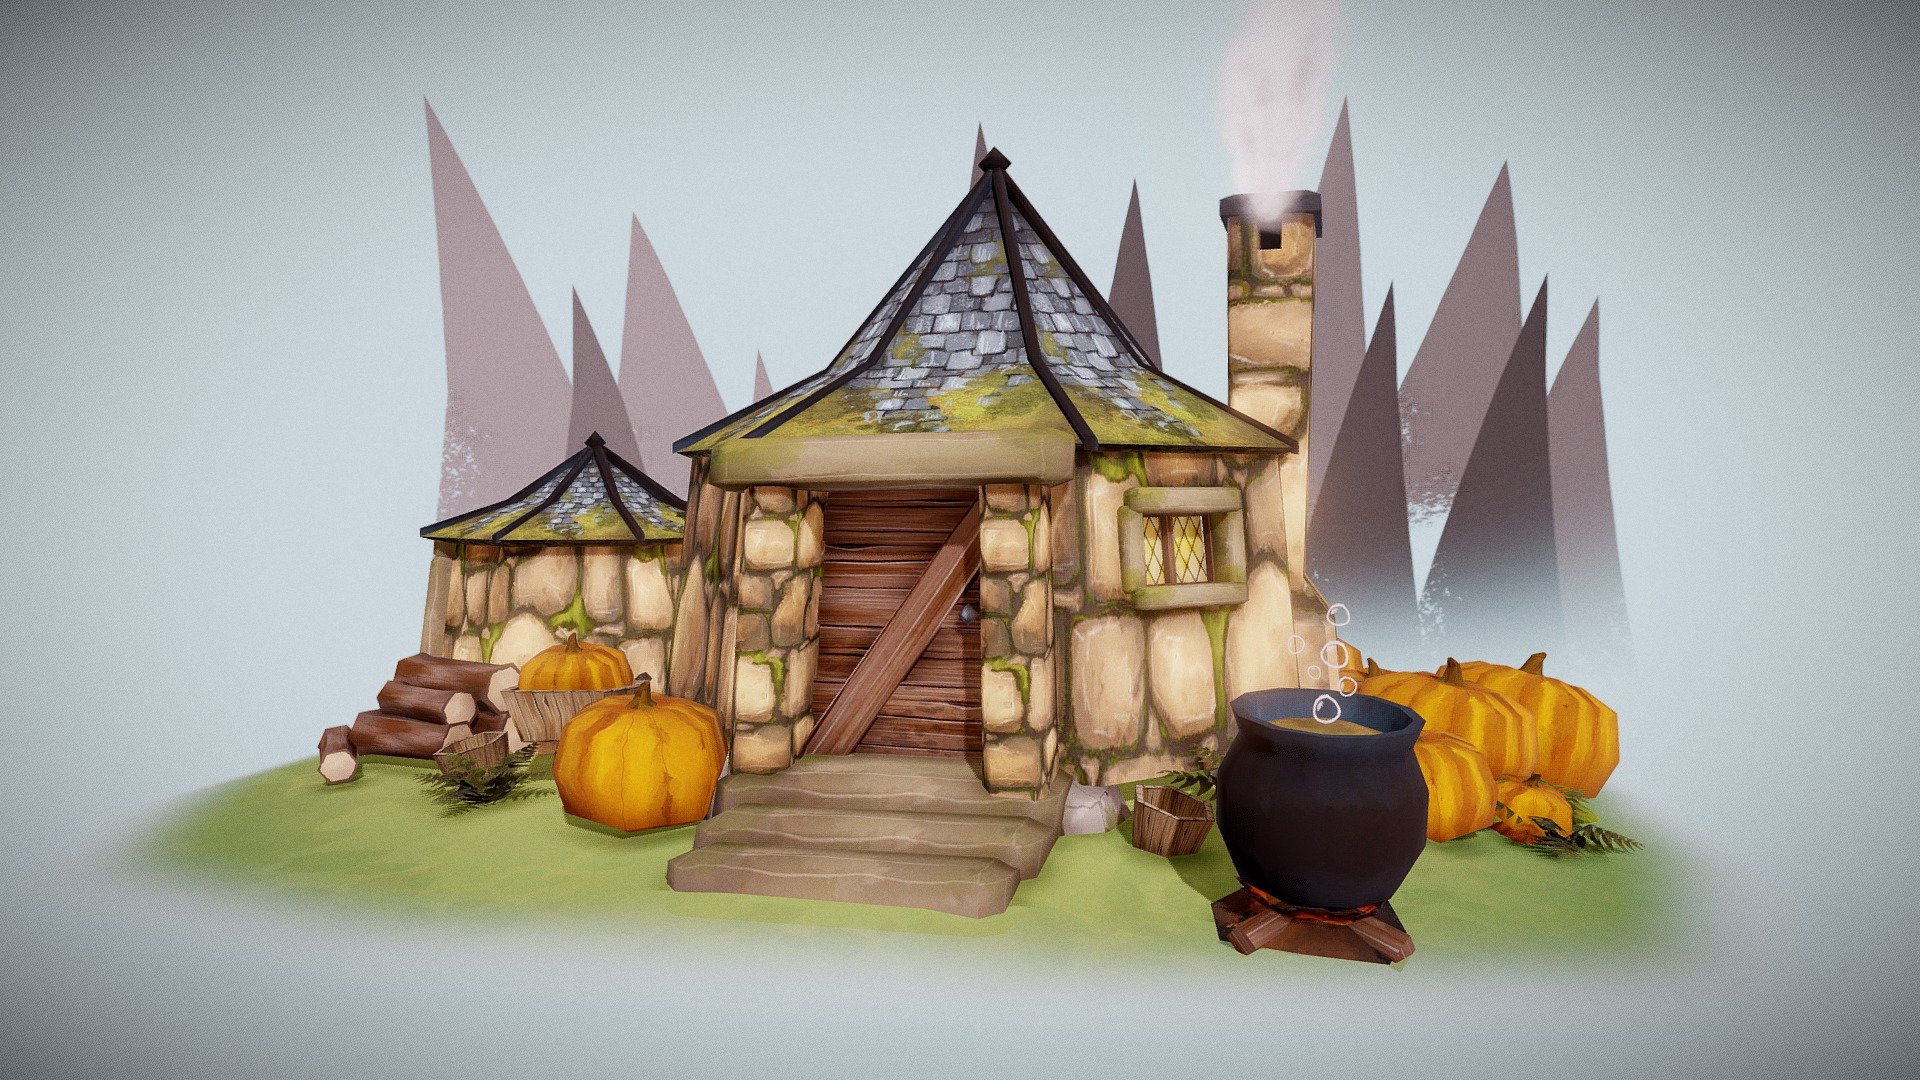 Hagrid's Hut in a low poly, hand painted style. Inspired by watching the films, as well as for practice of hand painted textures 3d model